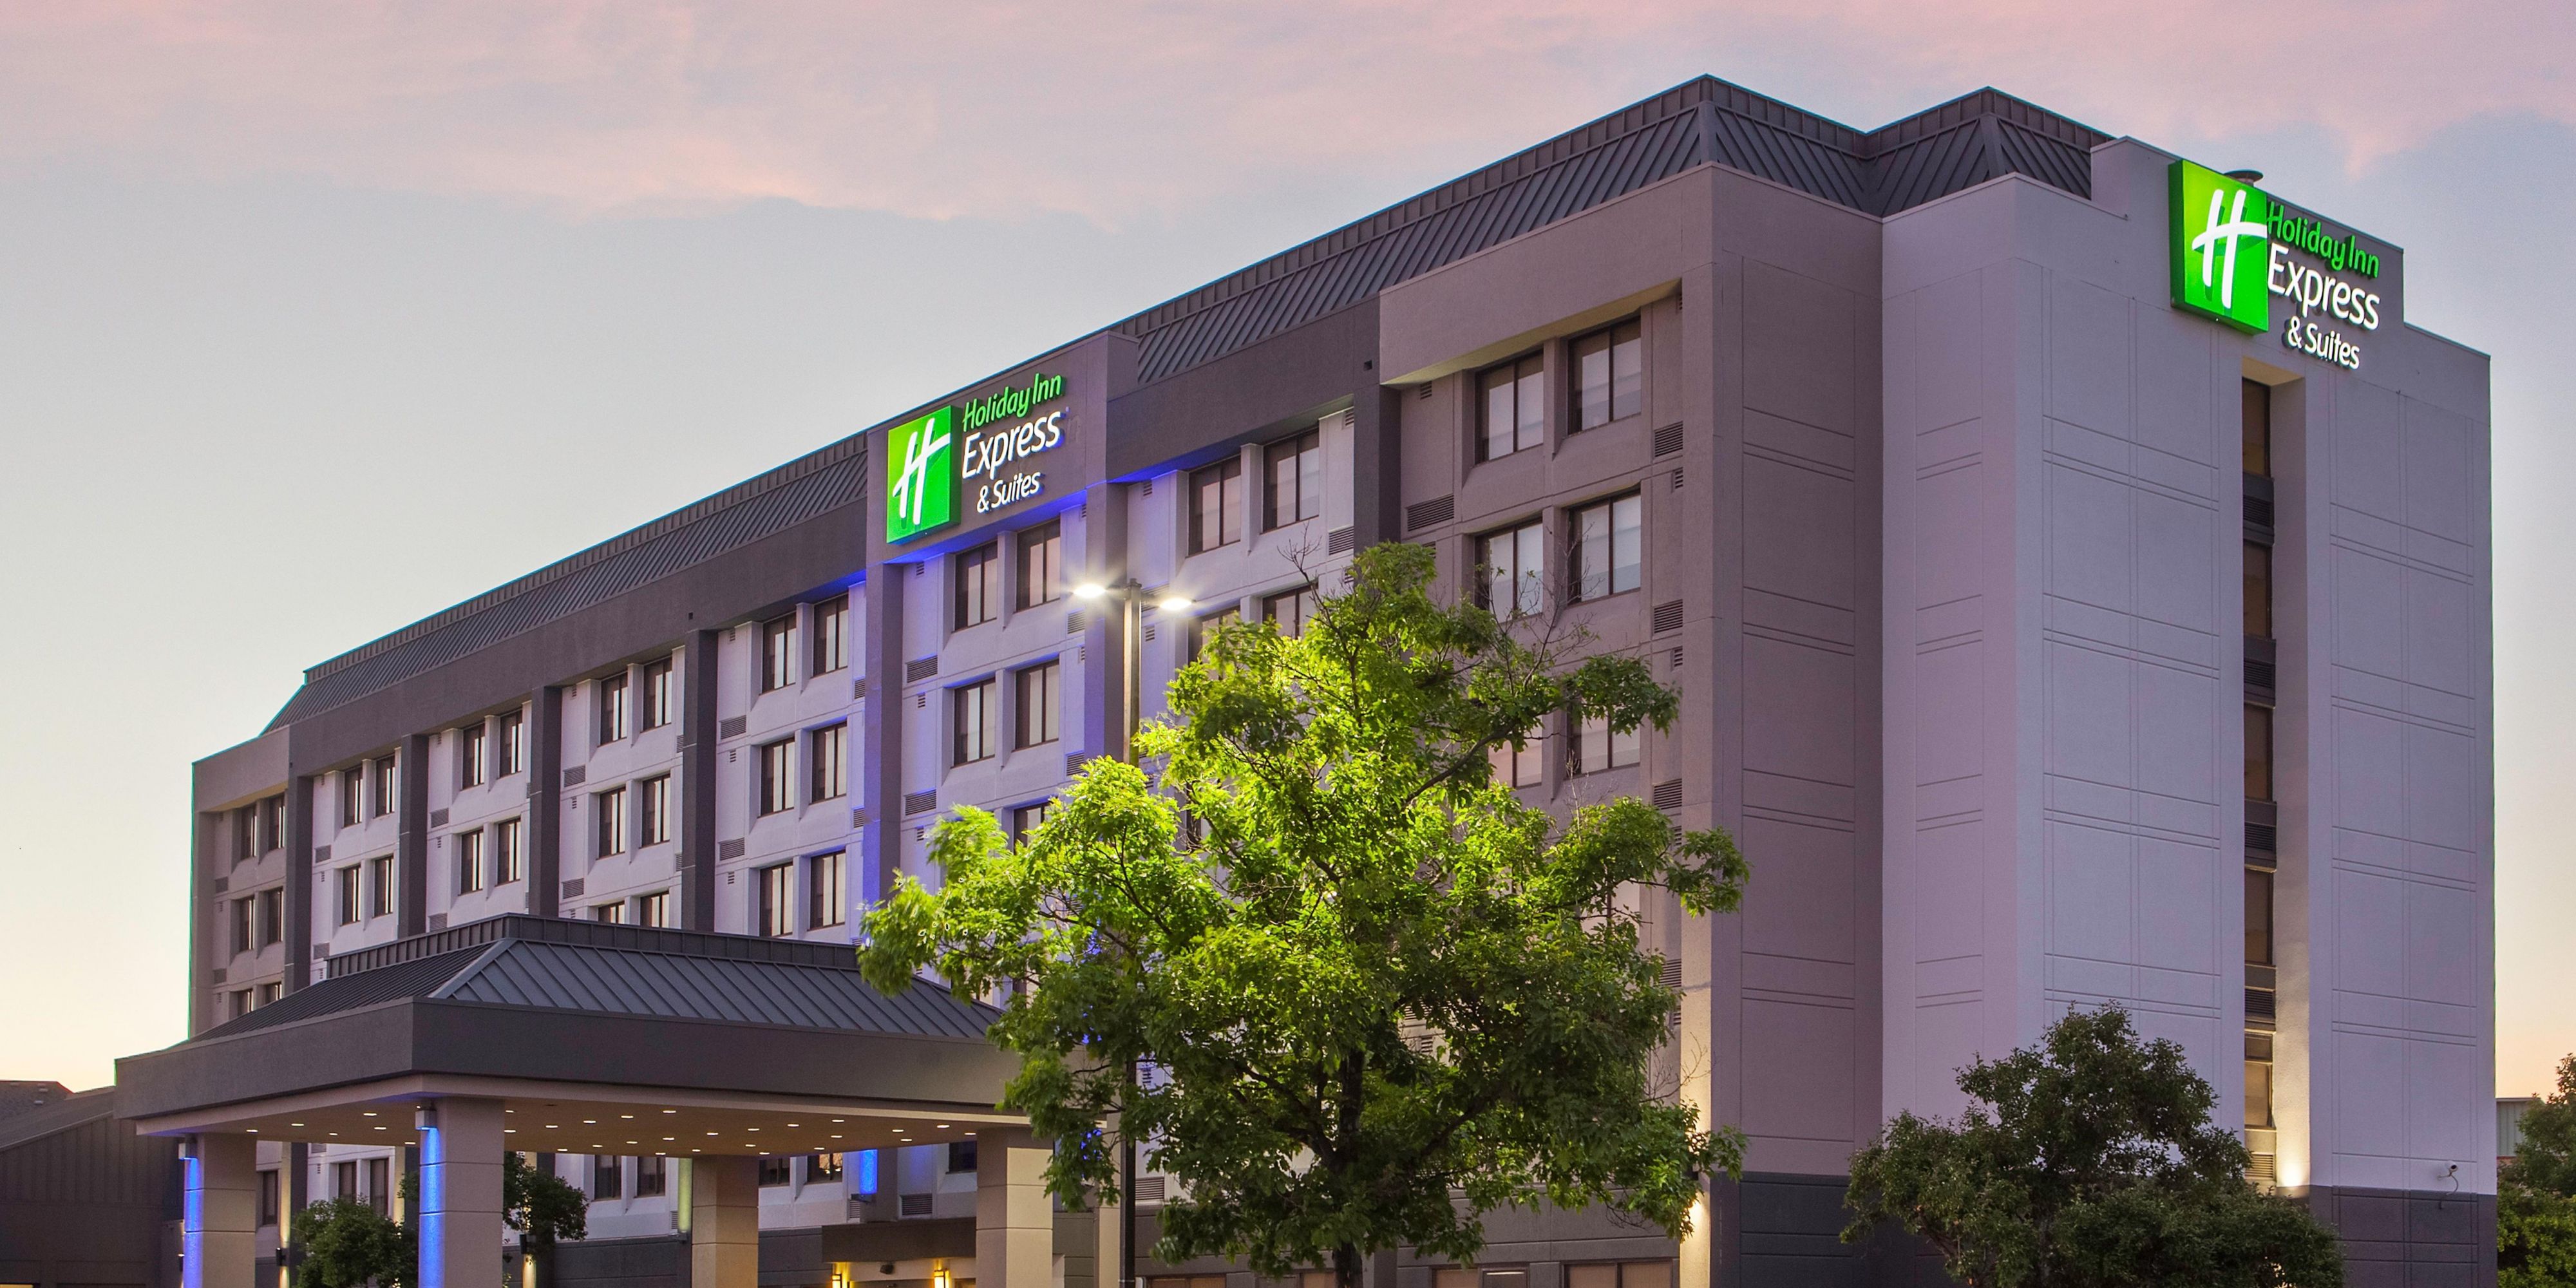 Why not enjoy a stay which is just 20 minute drive away from Toronto, that includes free parking and breakfast? Conveniently located at the Erin Mills and QEW Exit making your drive into Toronto a breeze!